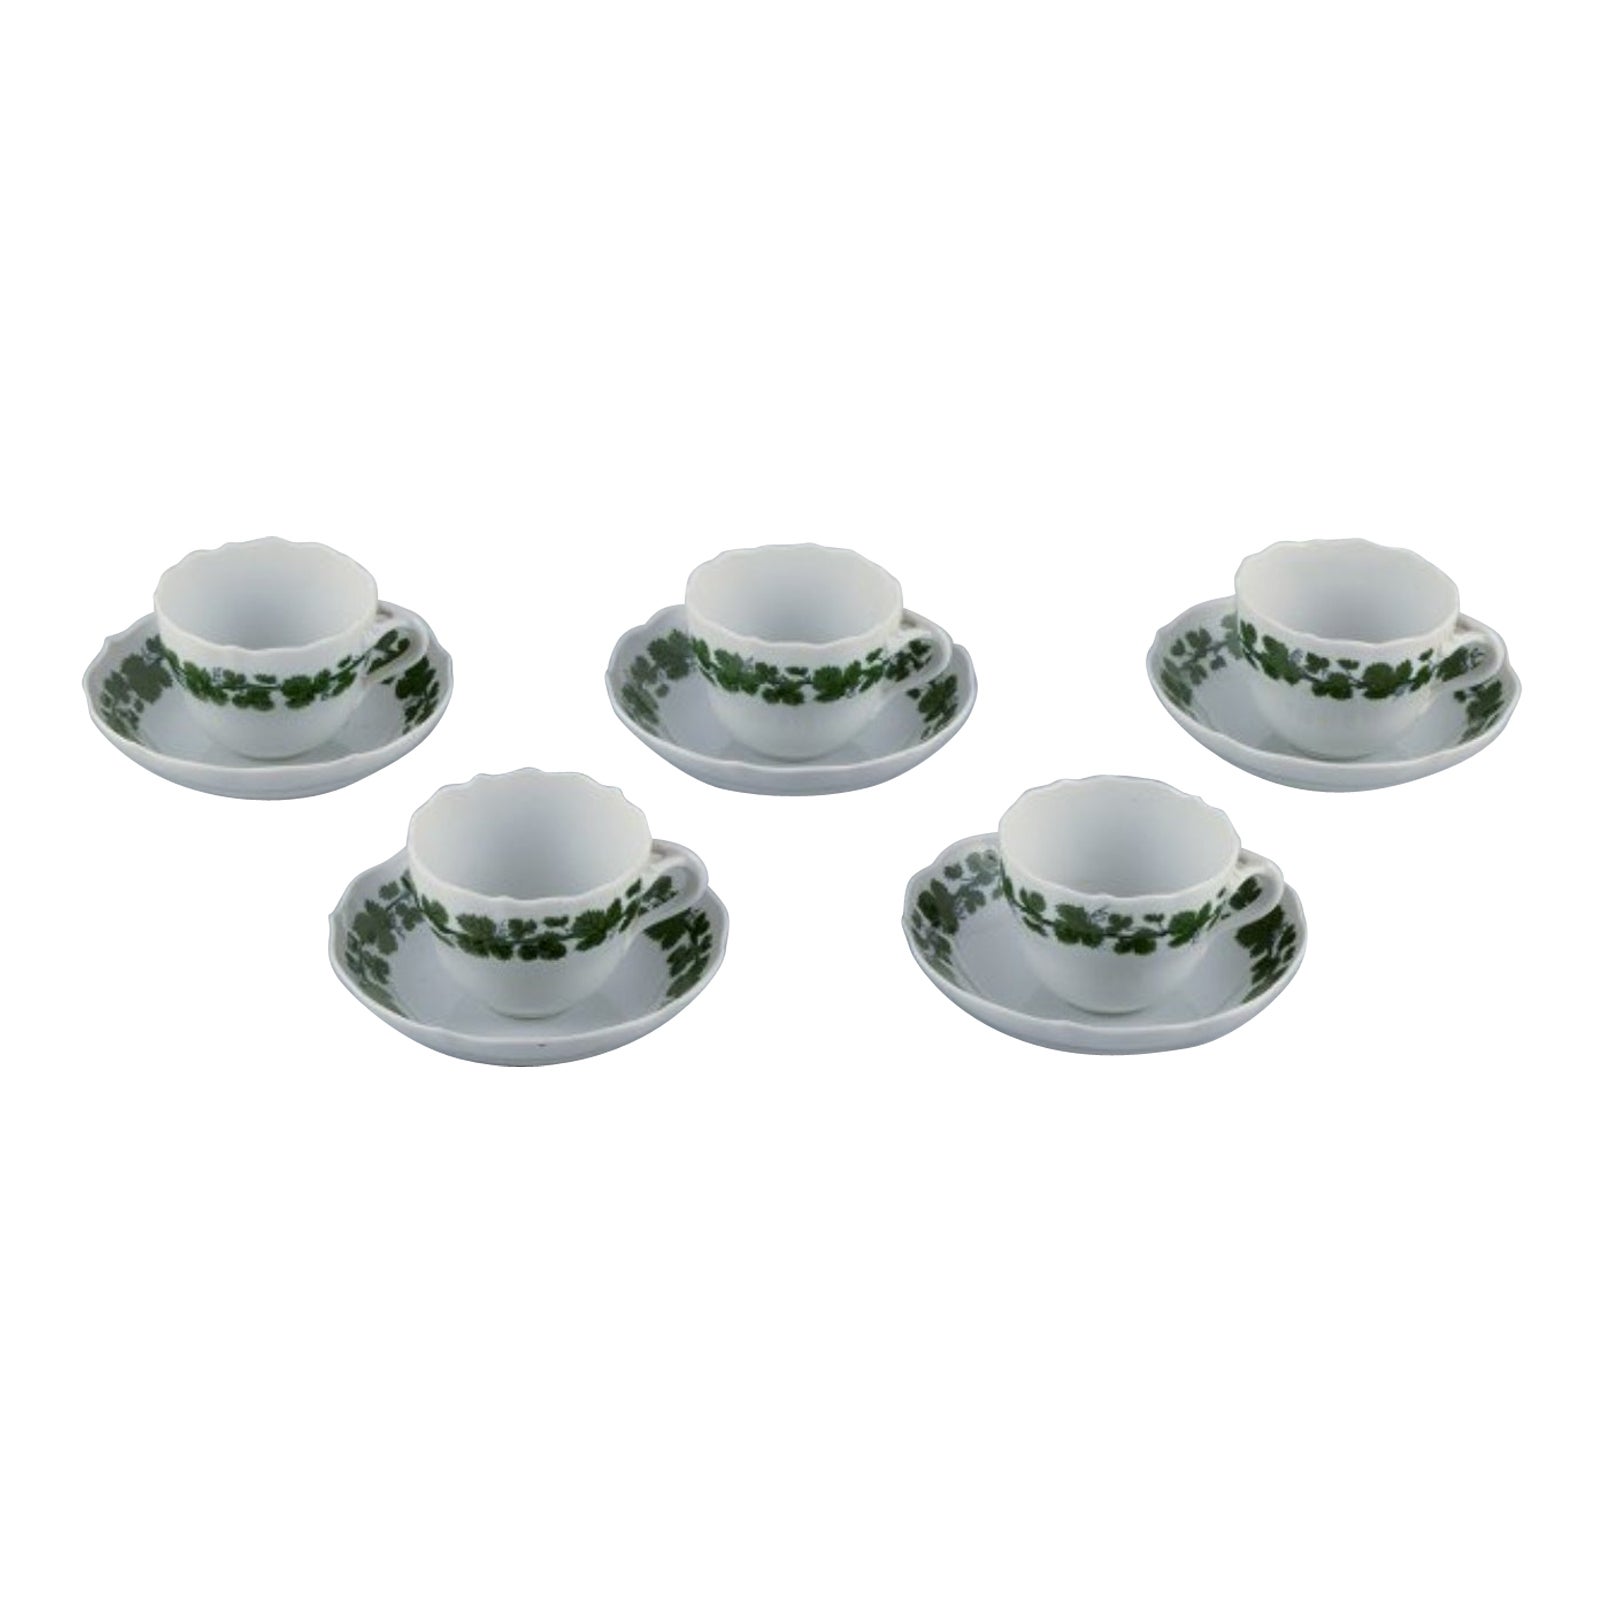 Meissen, Germany. Green Ivy Vine, set of five demitasse cups with saucers